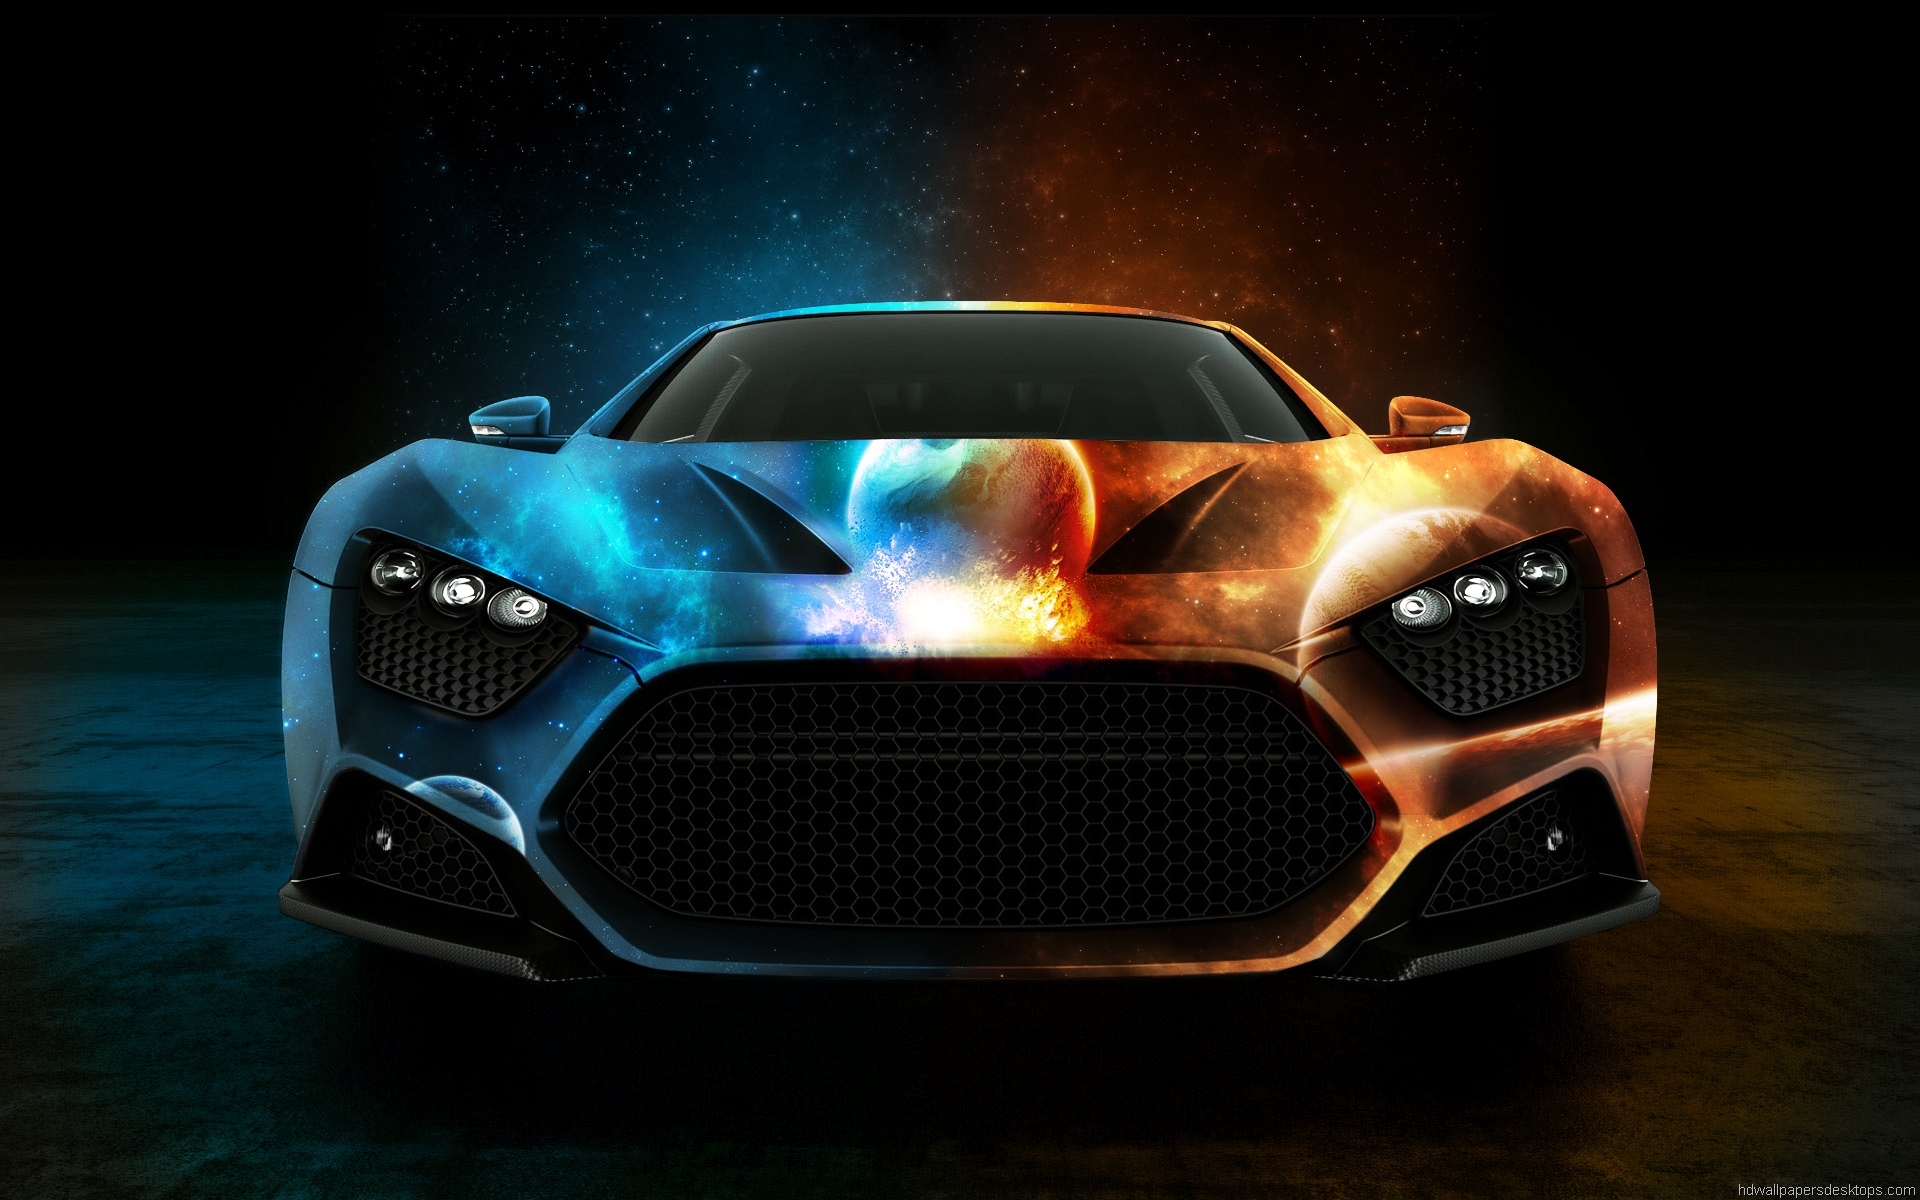 Cars Wallpapers Hd Full 1080p Desktop Backgrounds 1920x1200 Pictures